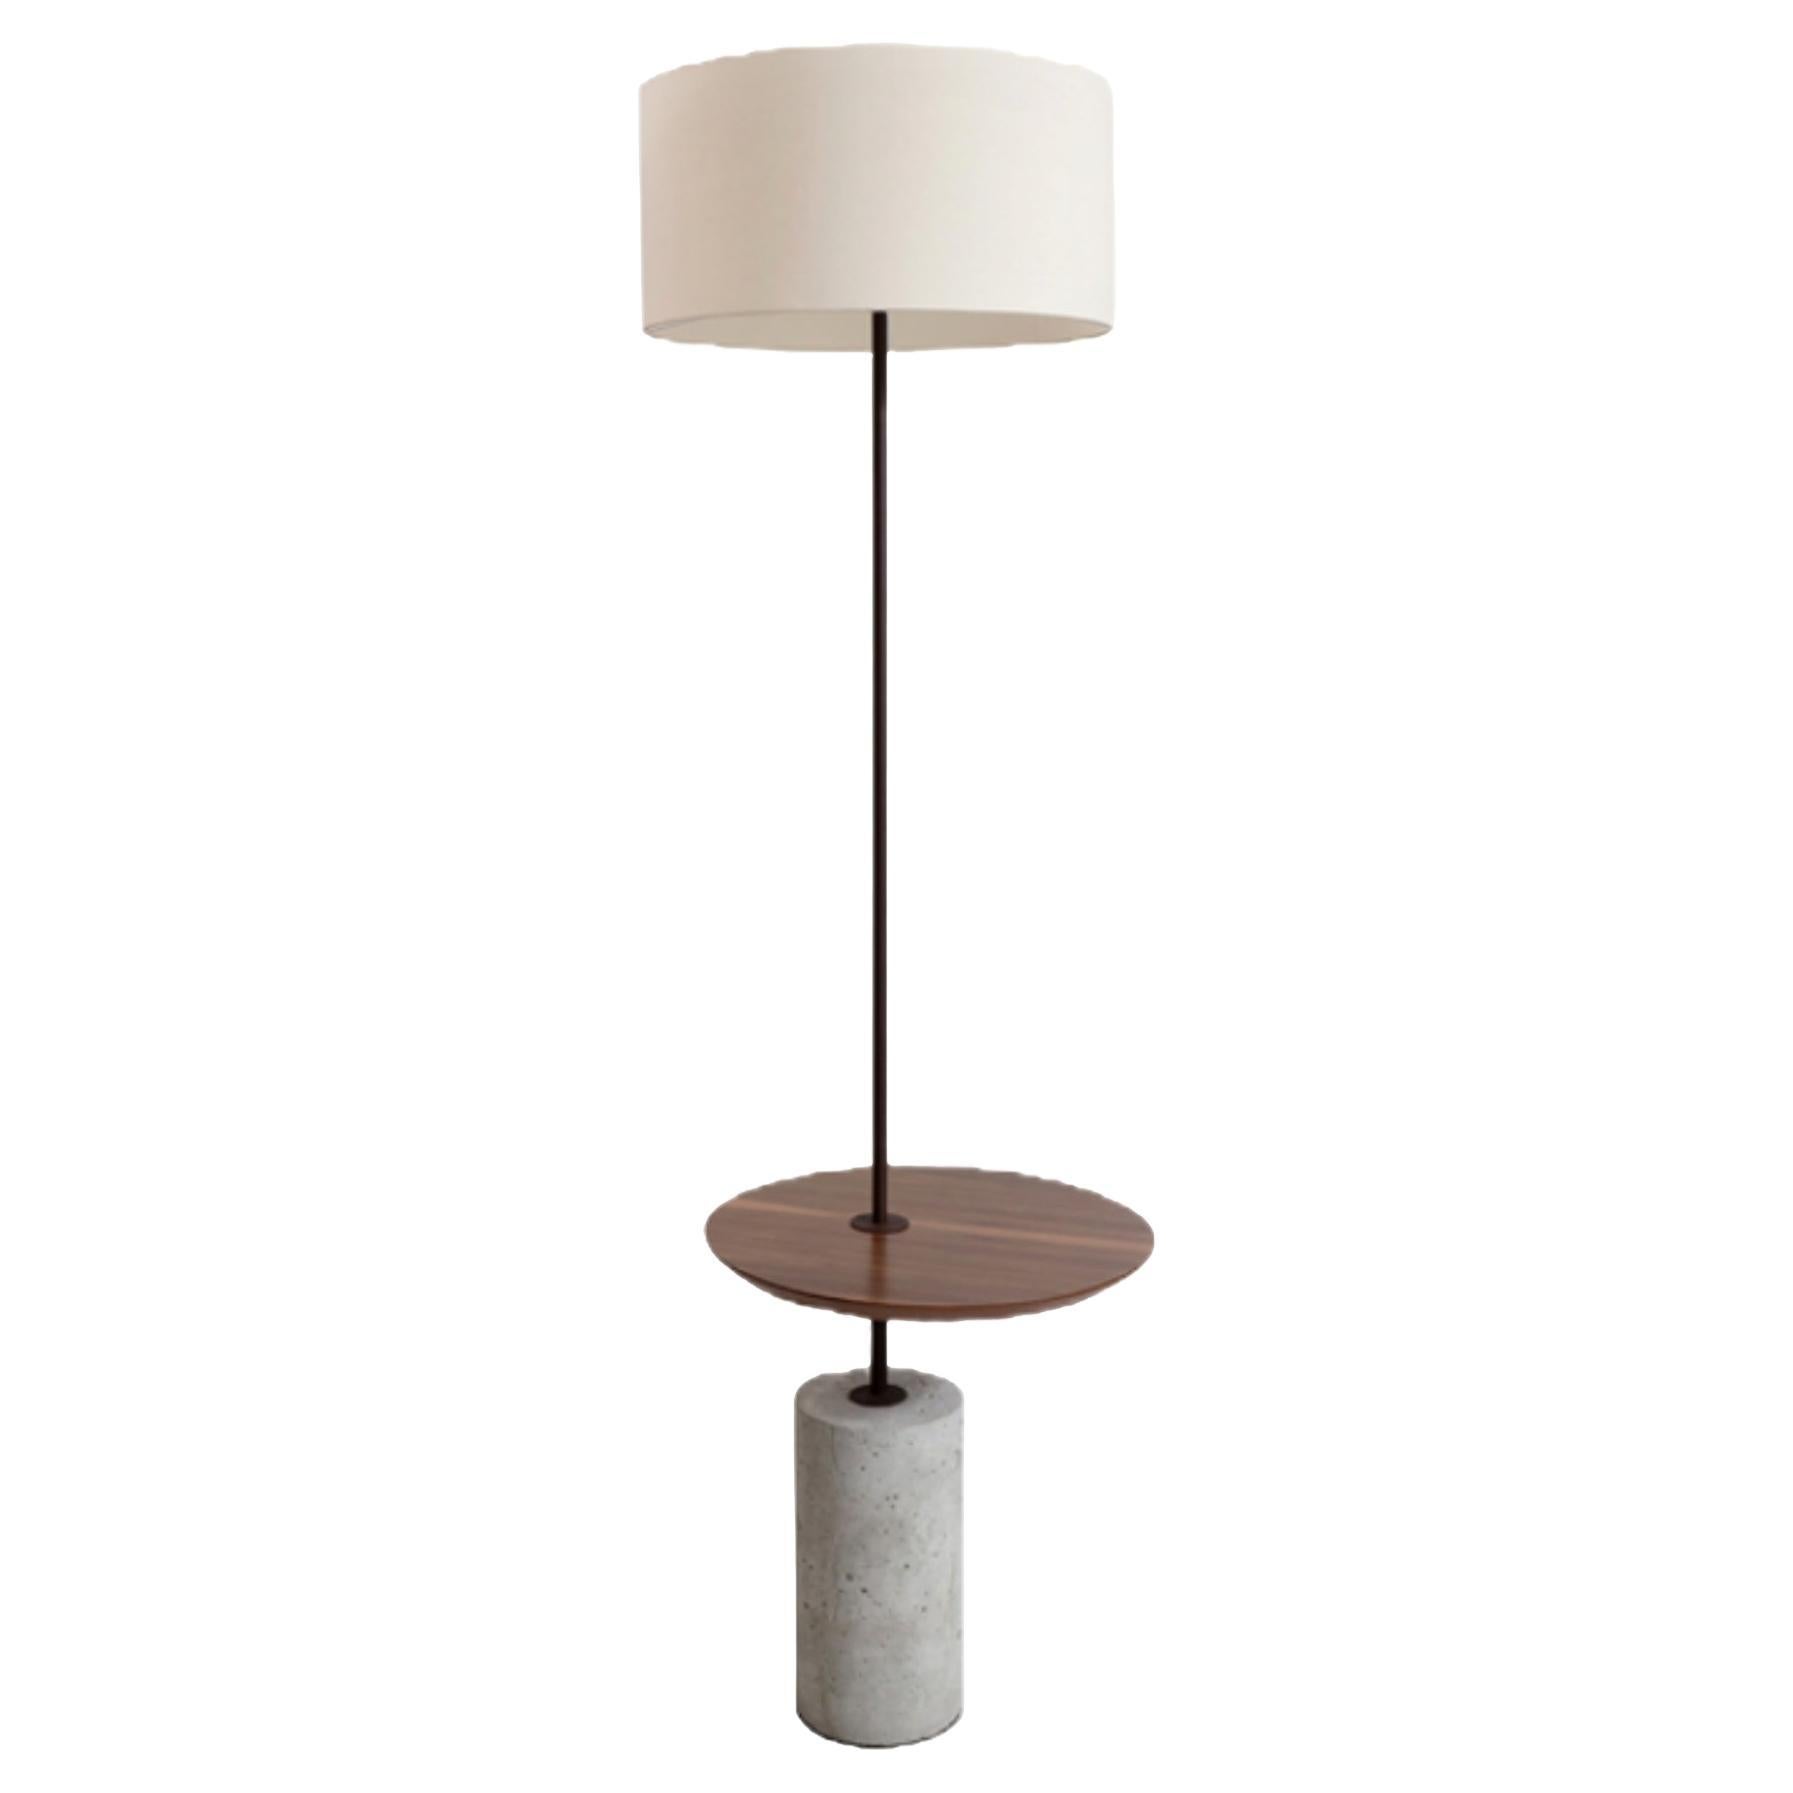 Giro Minimalist Floor Lamp In Painted Steel, Walnut and Concrete For Sale